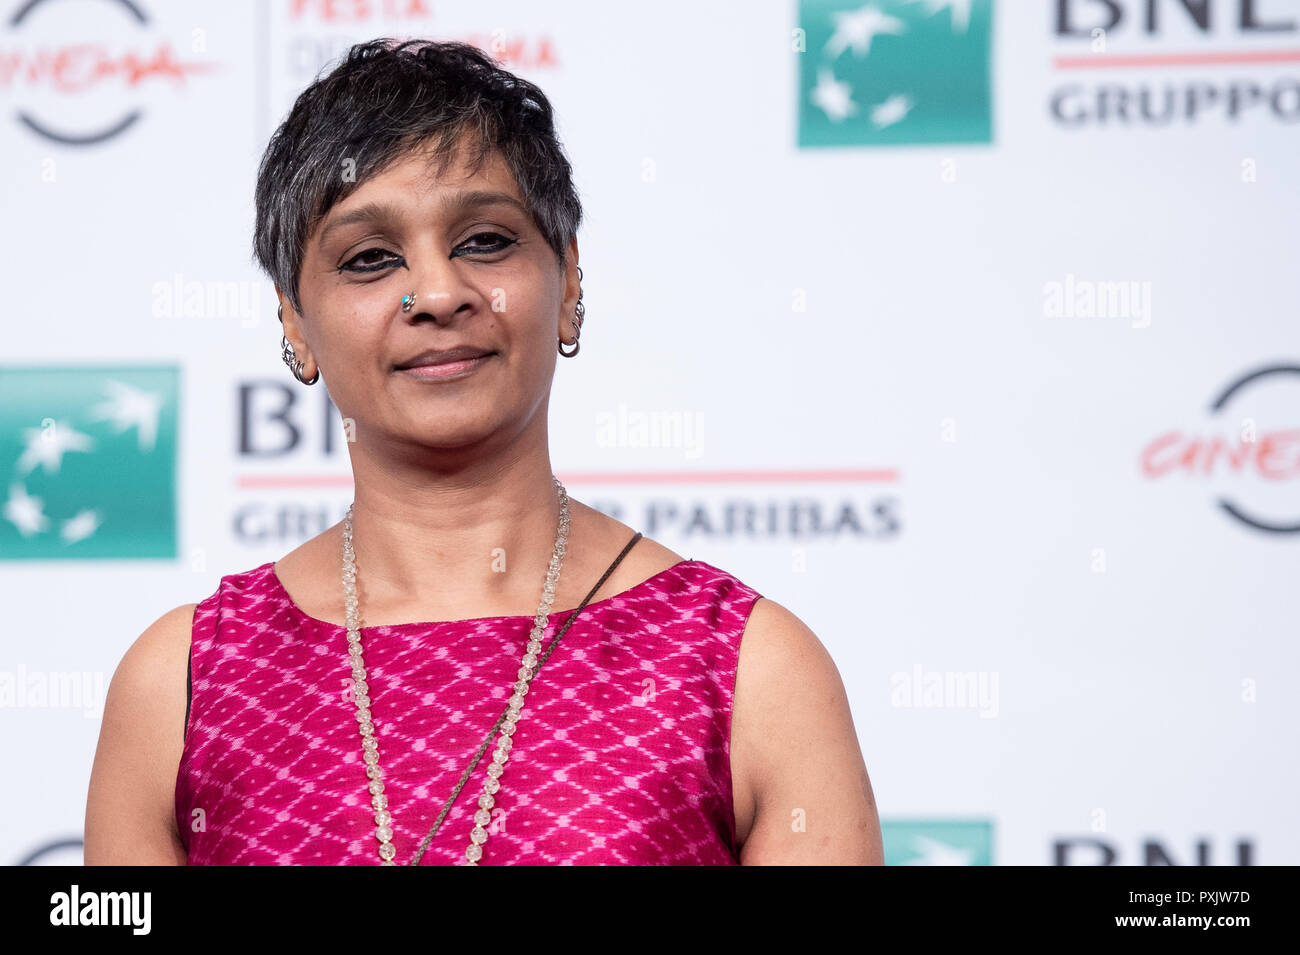 Rome, Italy. 23rd Oct 2018. Bharathi Mehra attends 'My Dear Prime Minister' phootcall during the 13th Rome Film Fest at Auditorium Parco Della Musica on 23 October 2018. Credit: Giuseppe Maffia/Alamy Live News Stock Photo